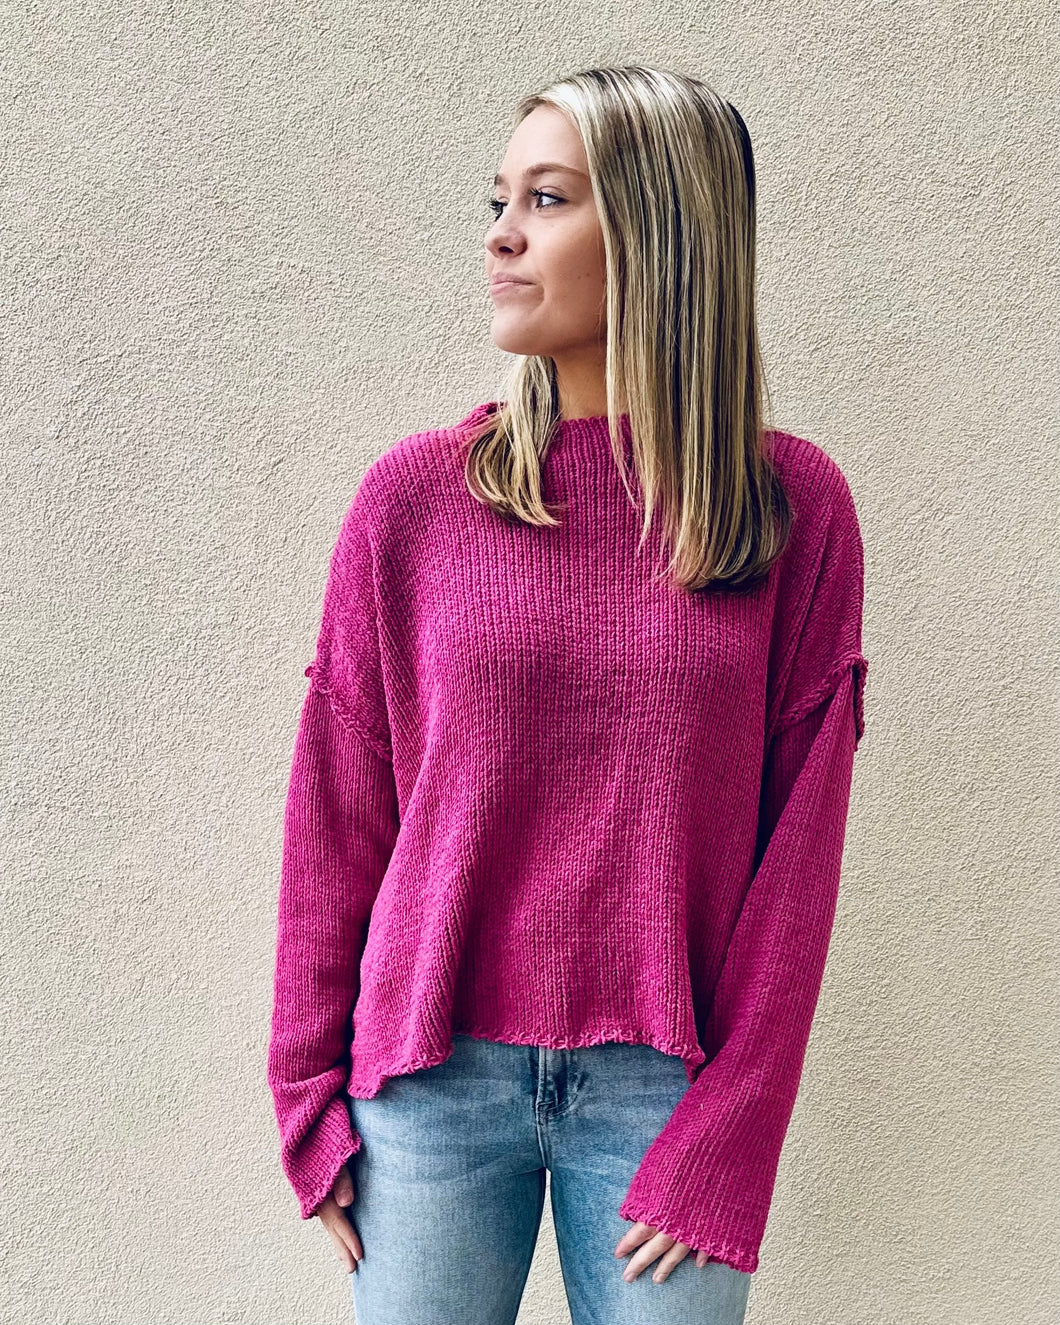 Spring Days Ahead Sweater